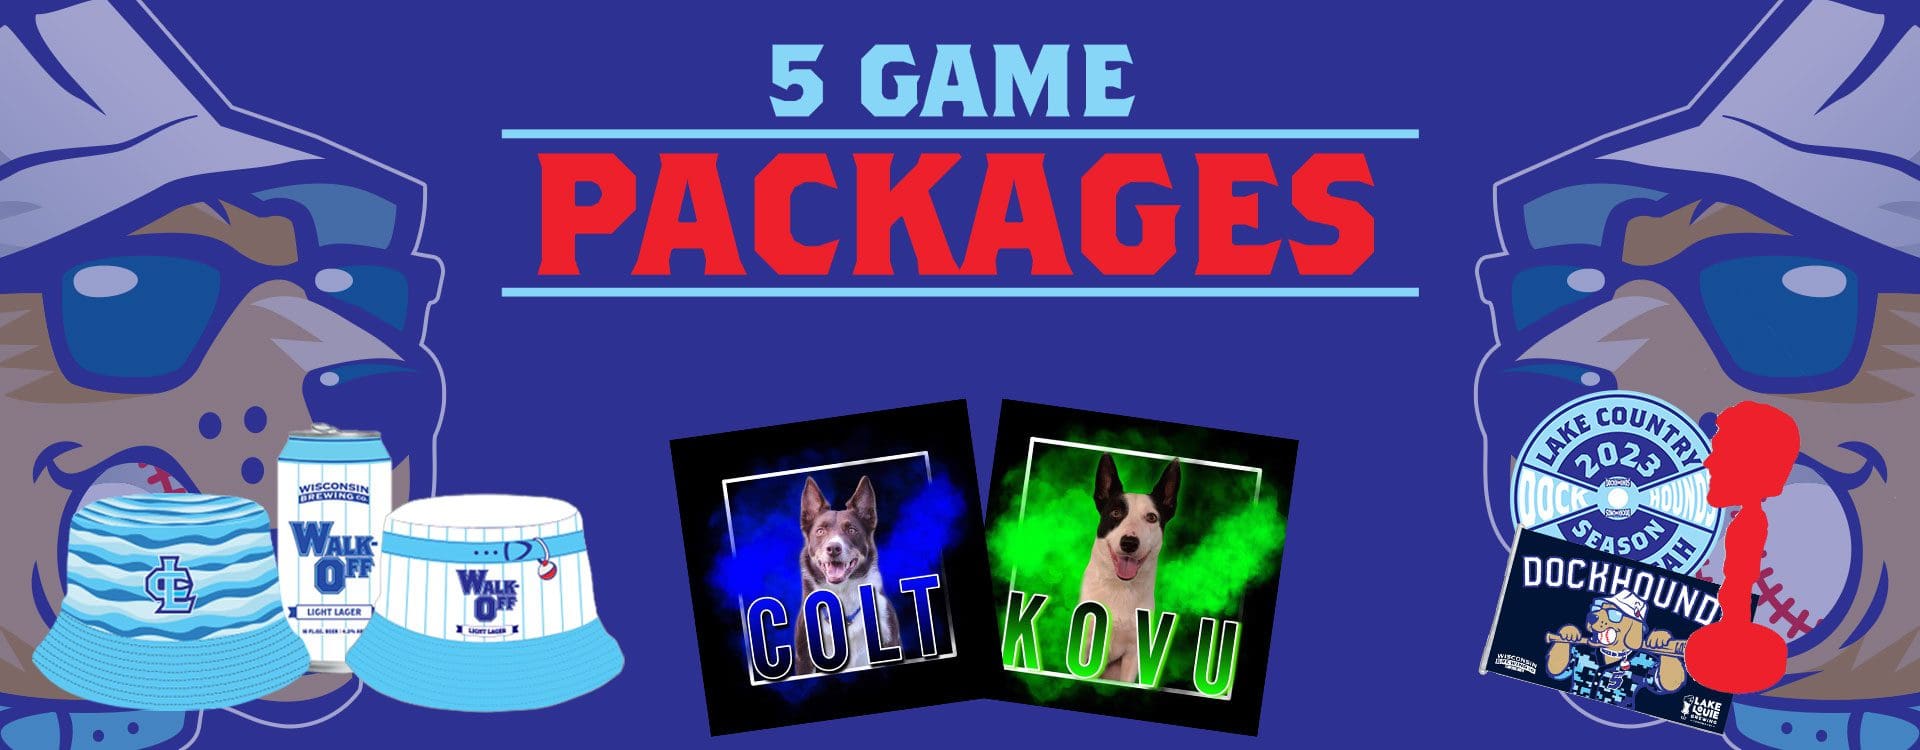 New 5 game packages